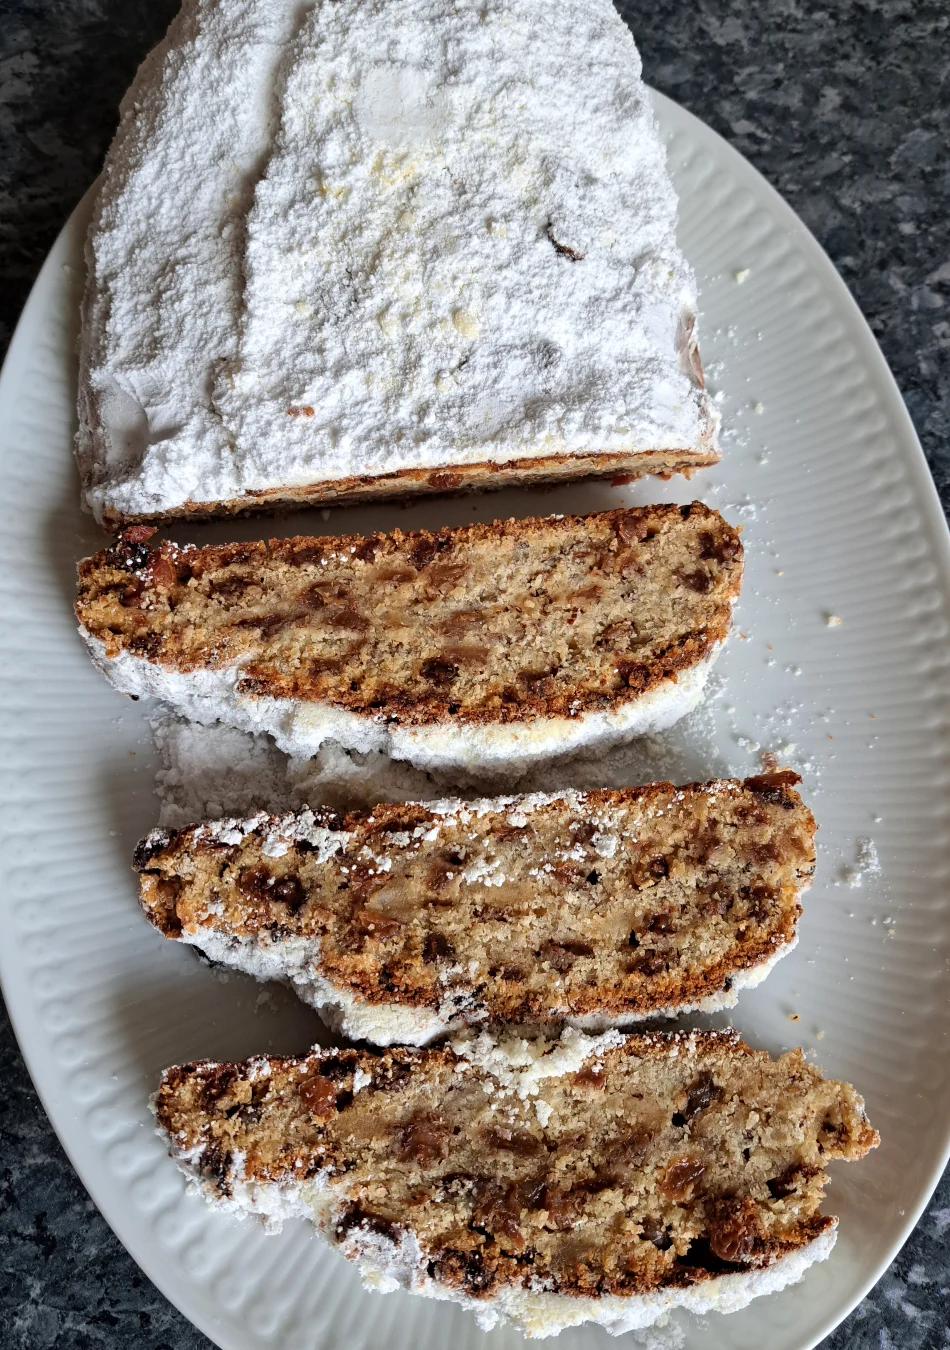 A beautifully presented Quark Stollen, generously dusted with powdered sugar, perfect for a festive Christmas treat.